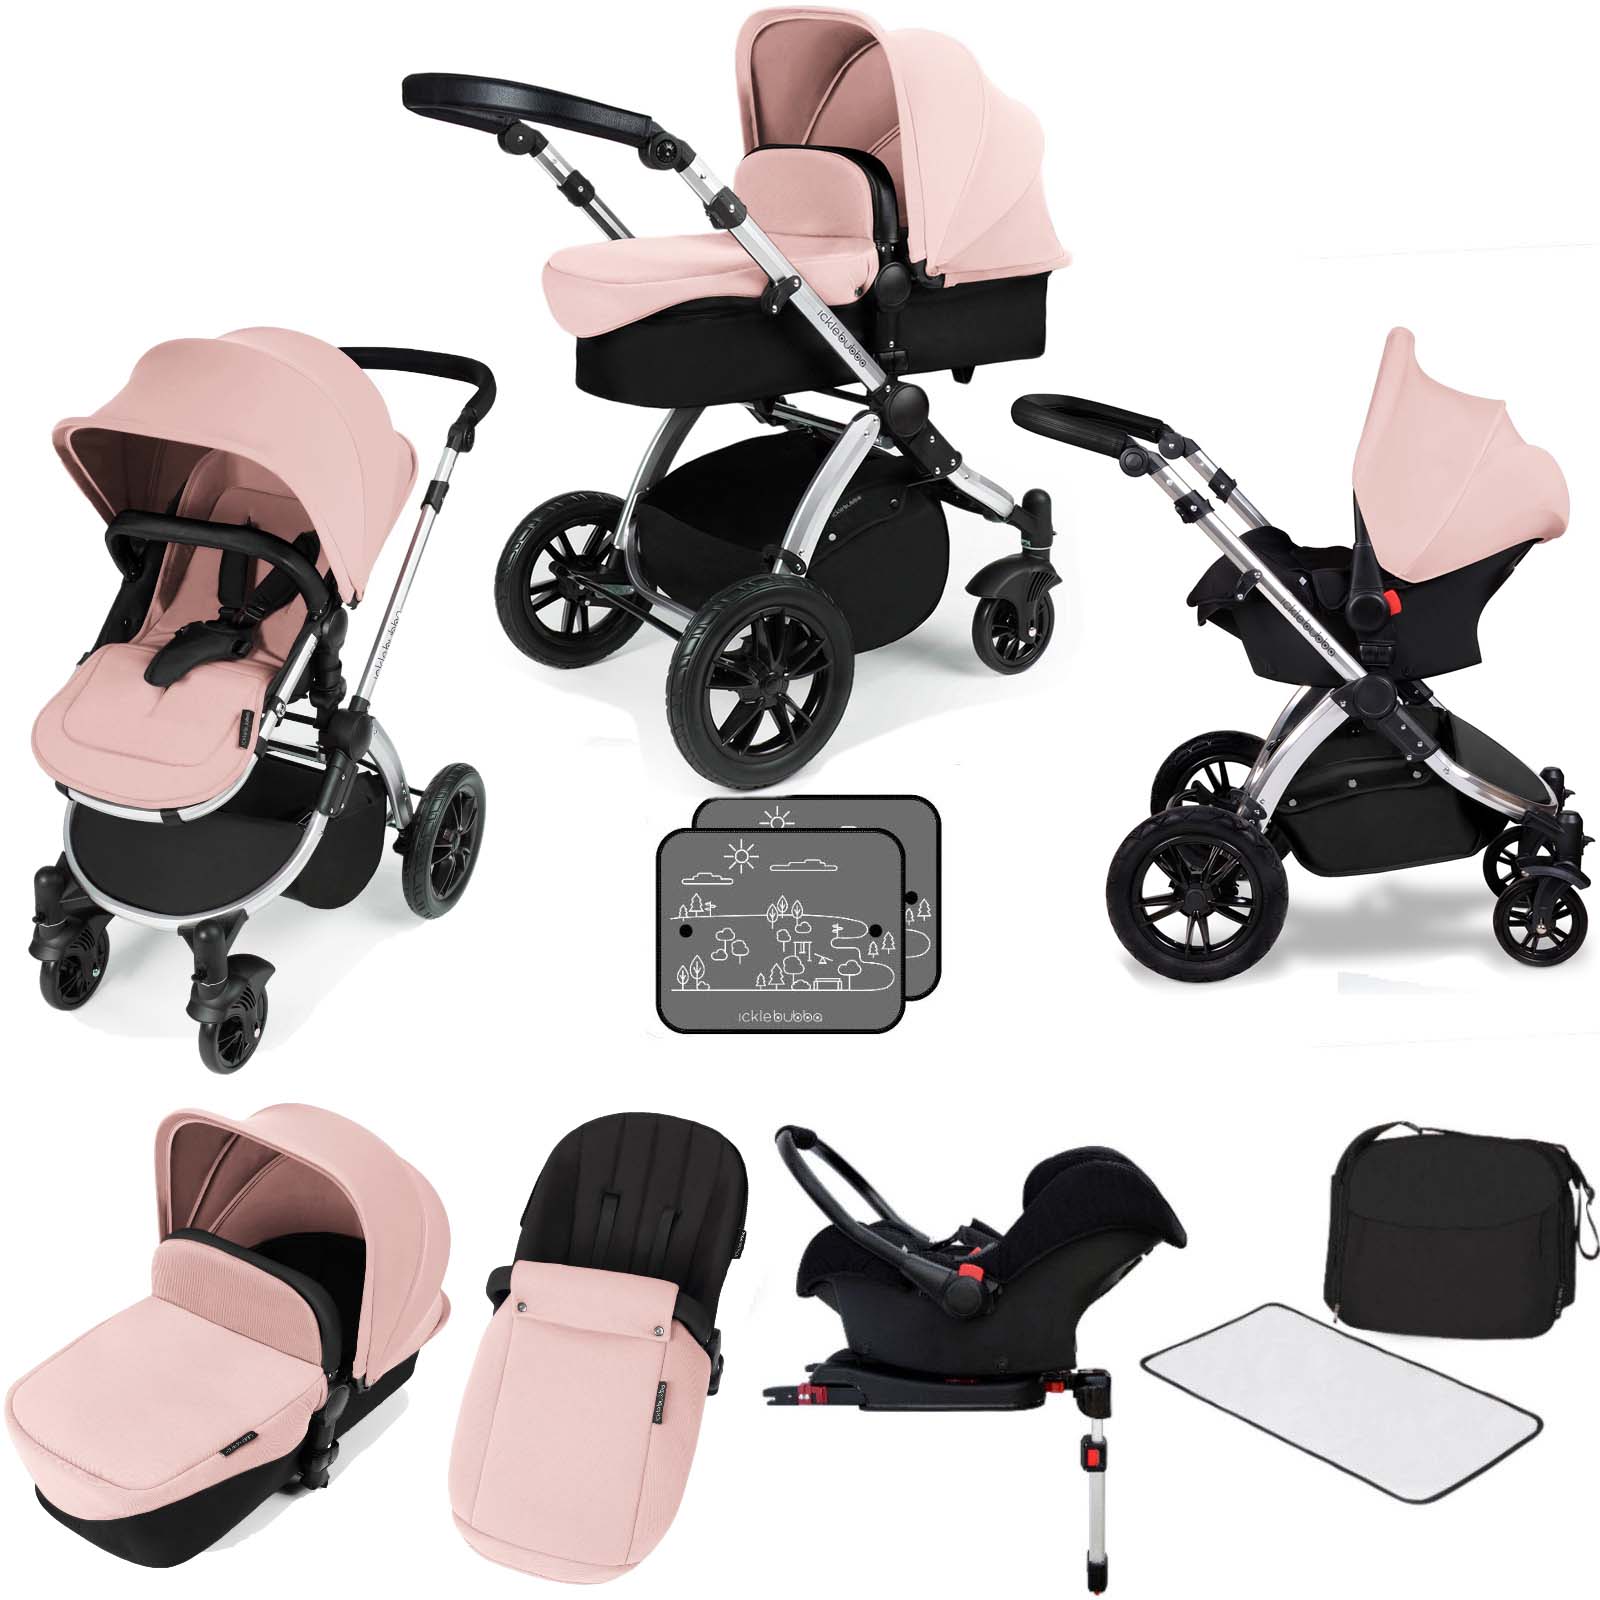 Ickle bubba Stomp V3 Silver All In One Travel System & Isofix Base - Pink...